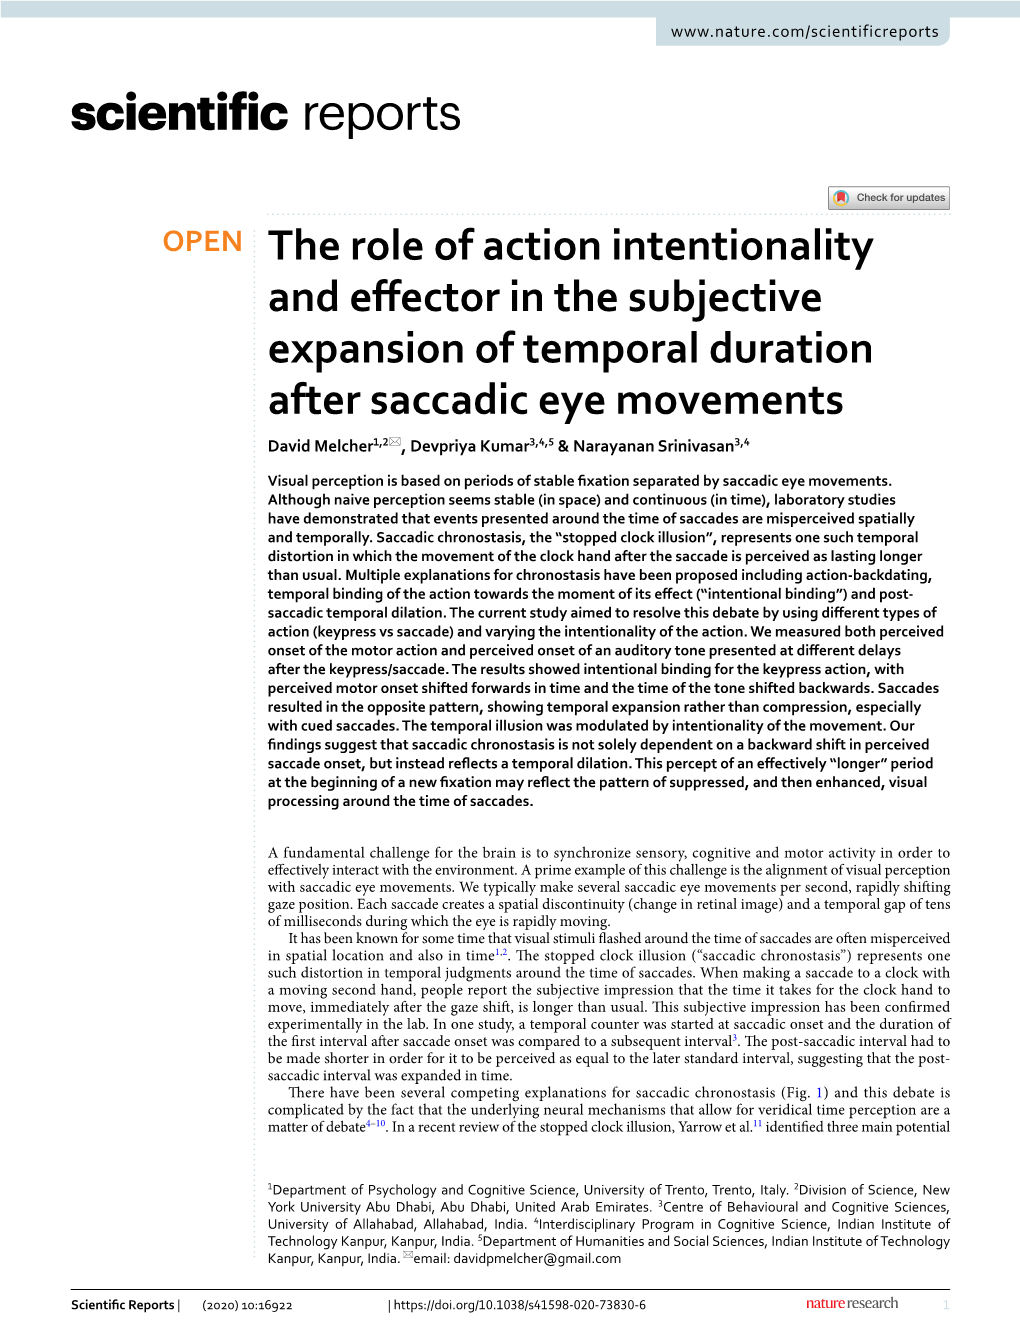 The Role of Action Intentionality and Effector in the Subjective Expansion